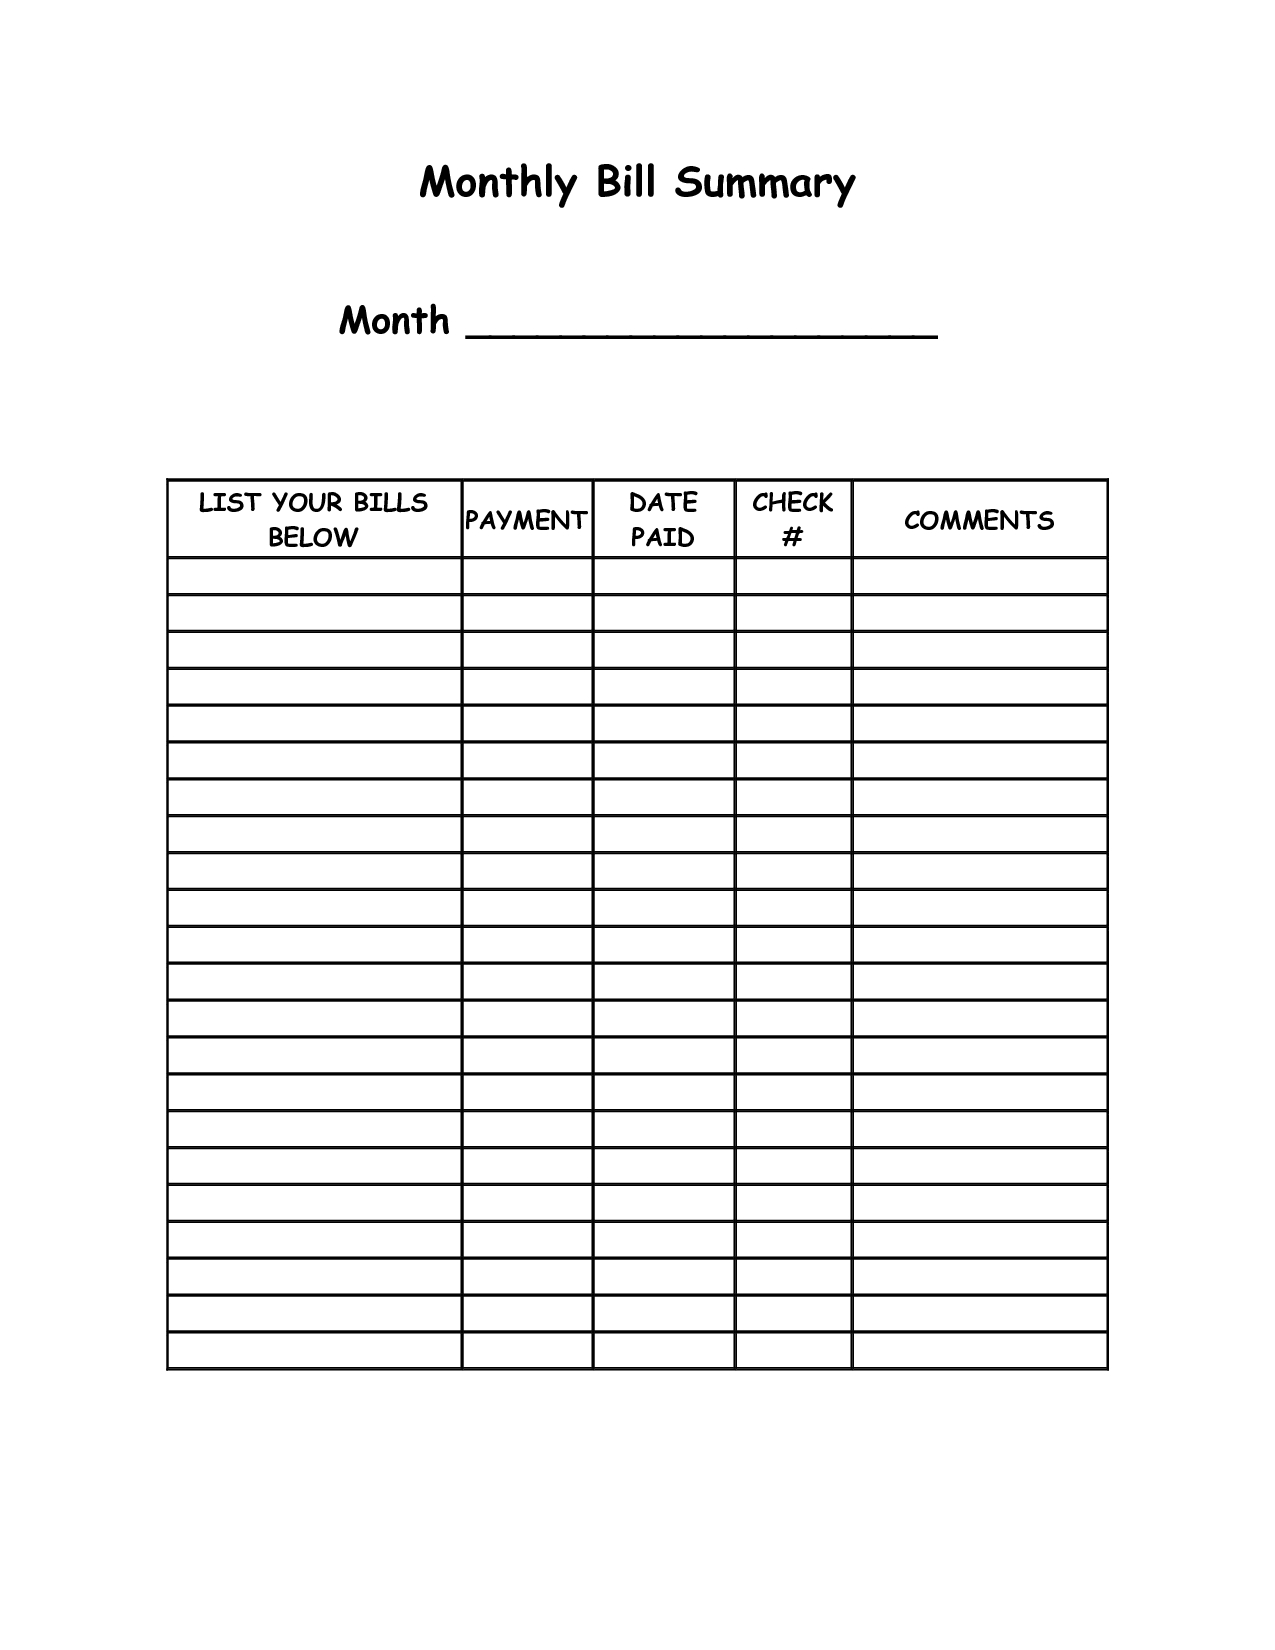 Monthly Bill Summary Doc | Monthly Bill, Organizing Monthly  Blank Bill Paying Sheet